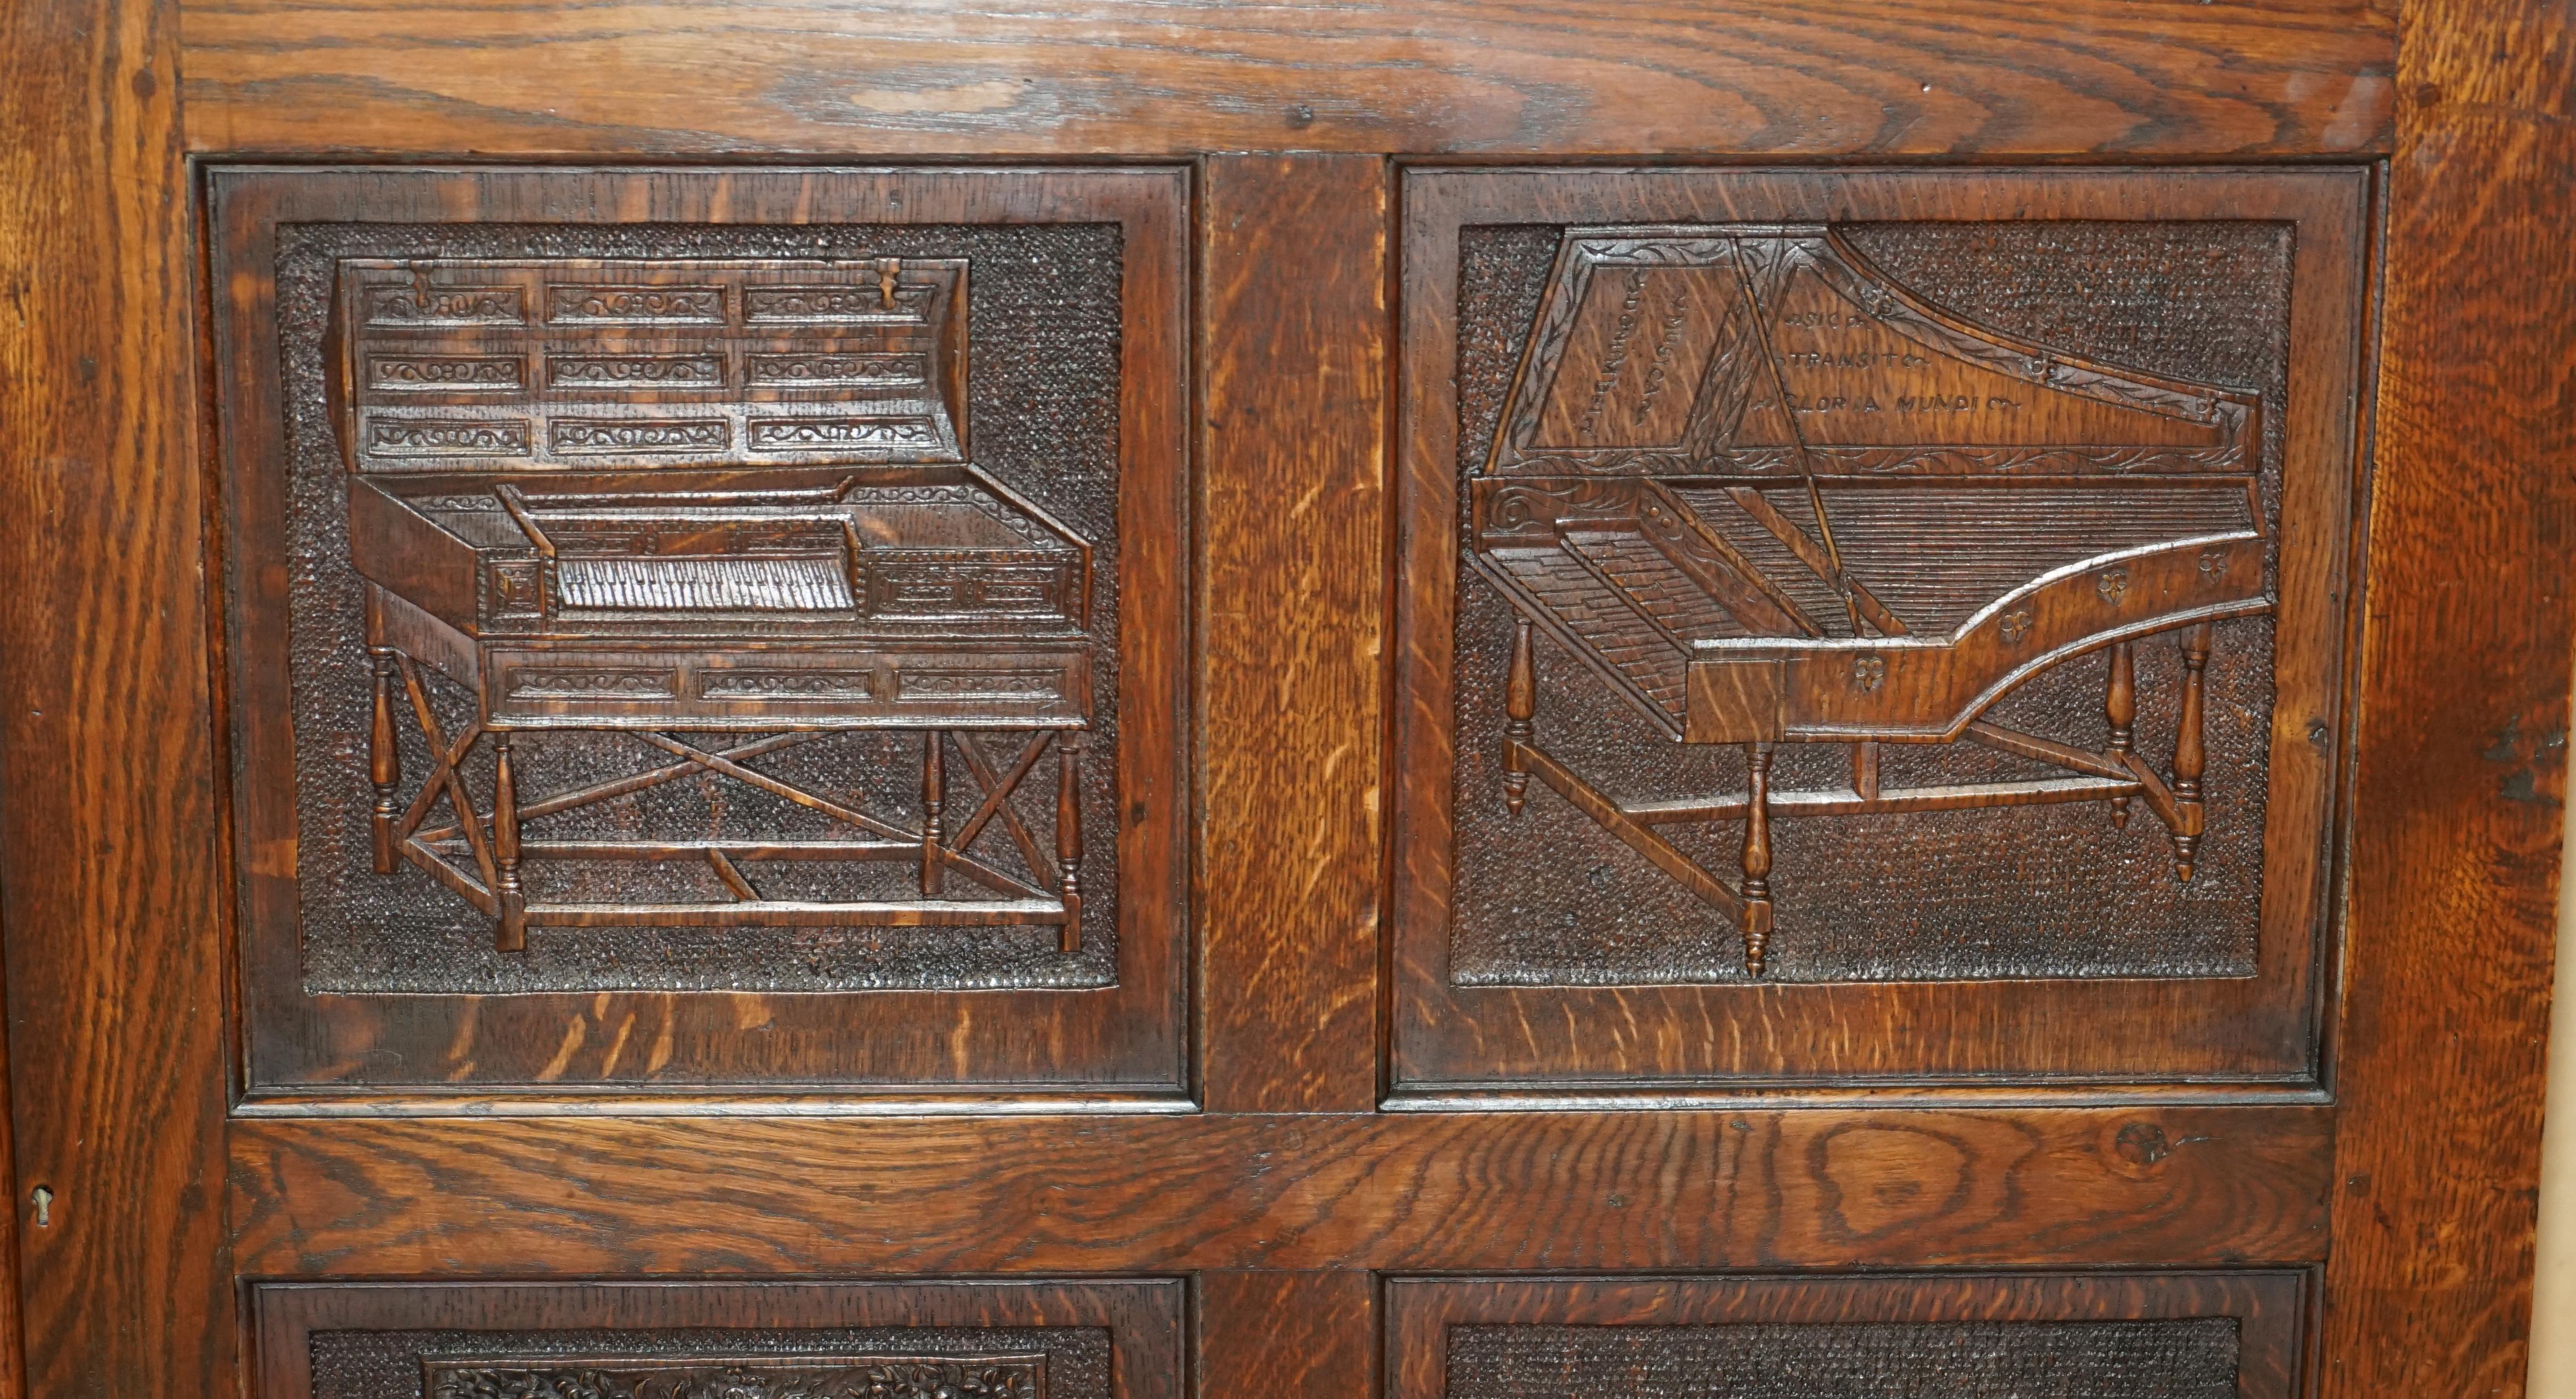 IMPORTANT CARVED BOOKCASE CABiNET FROM THE BATE COLLECTION IN OXFORD UNIVERSITY For Sale 12